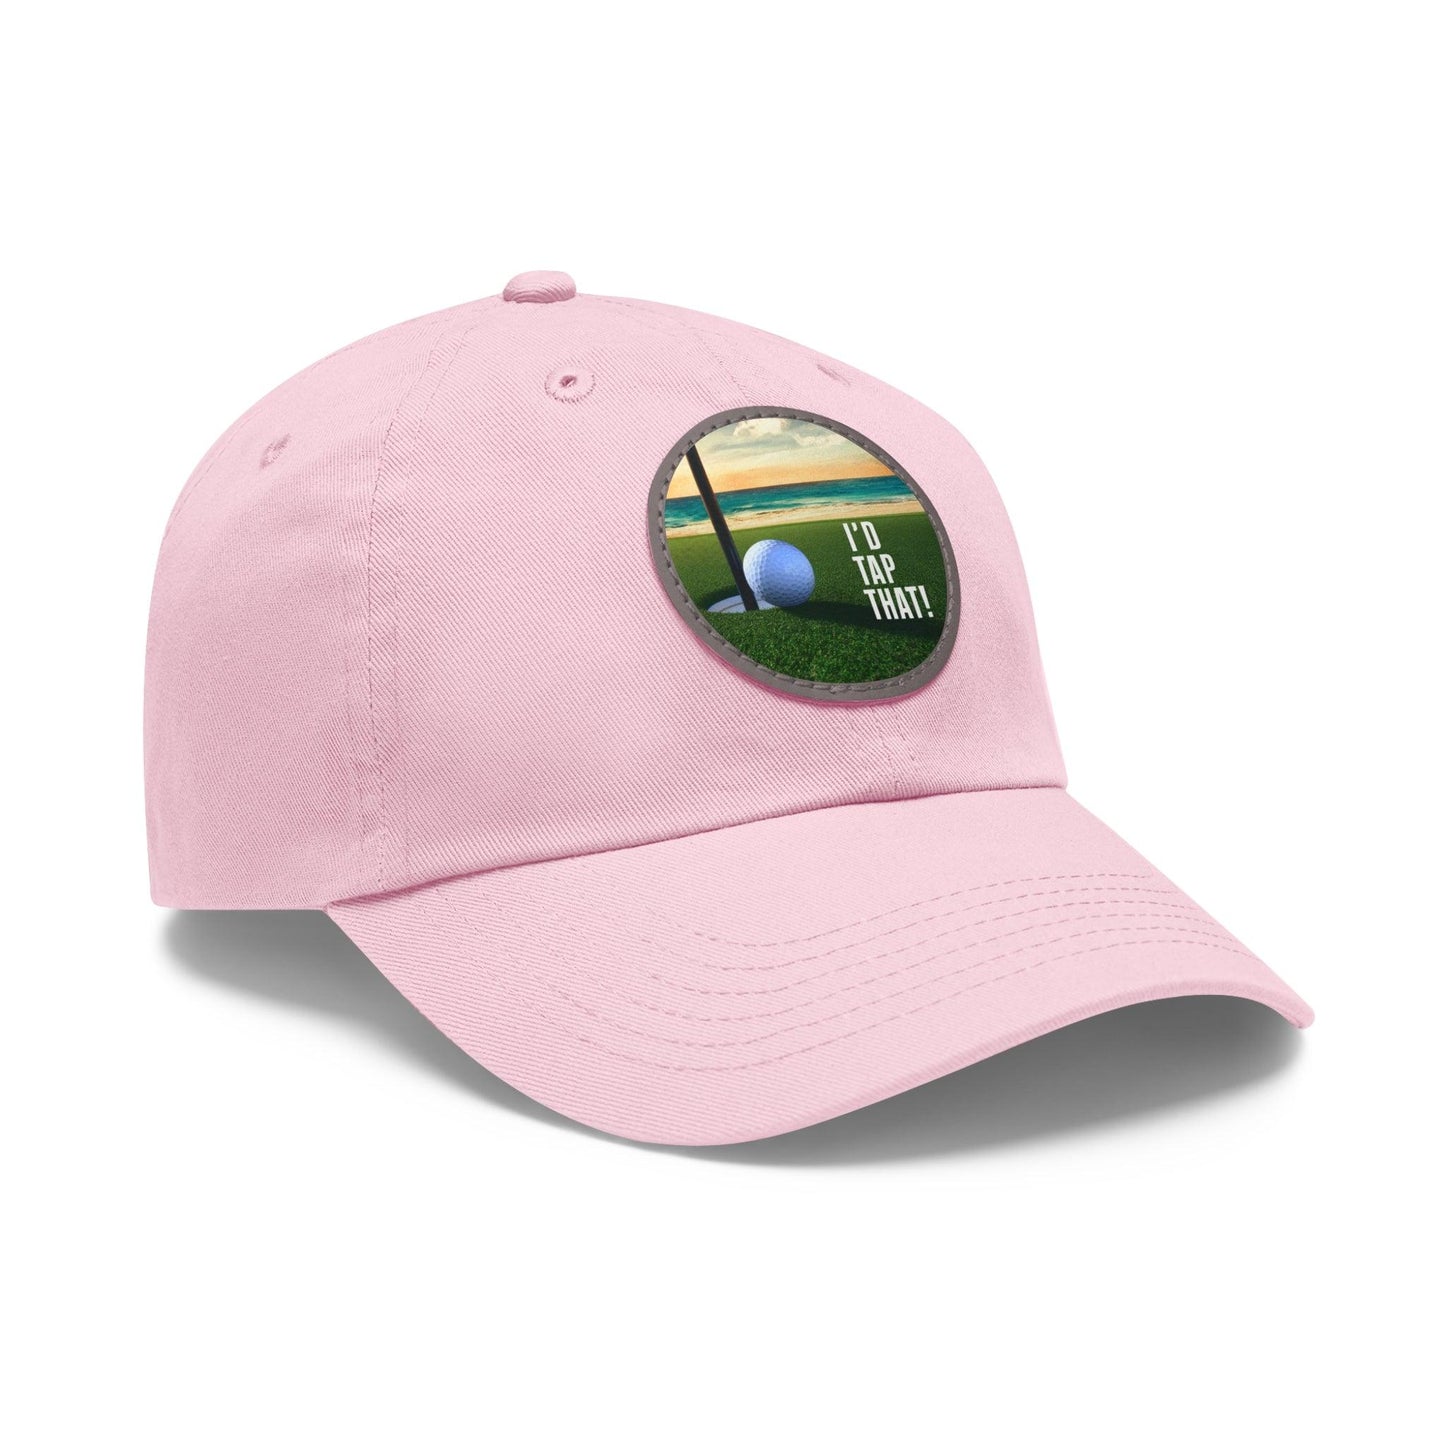 I'd Tap that Beach Side Golfing Hat, Funny Saying Beach Cap, Gulf Inspired Cap - Coastal Collections